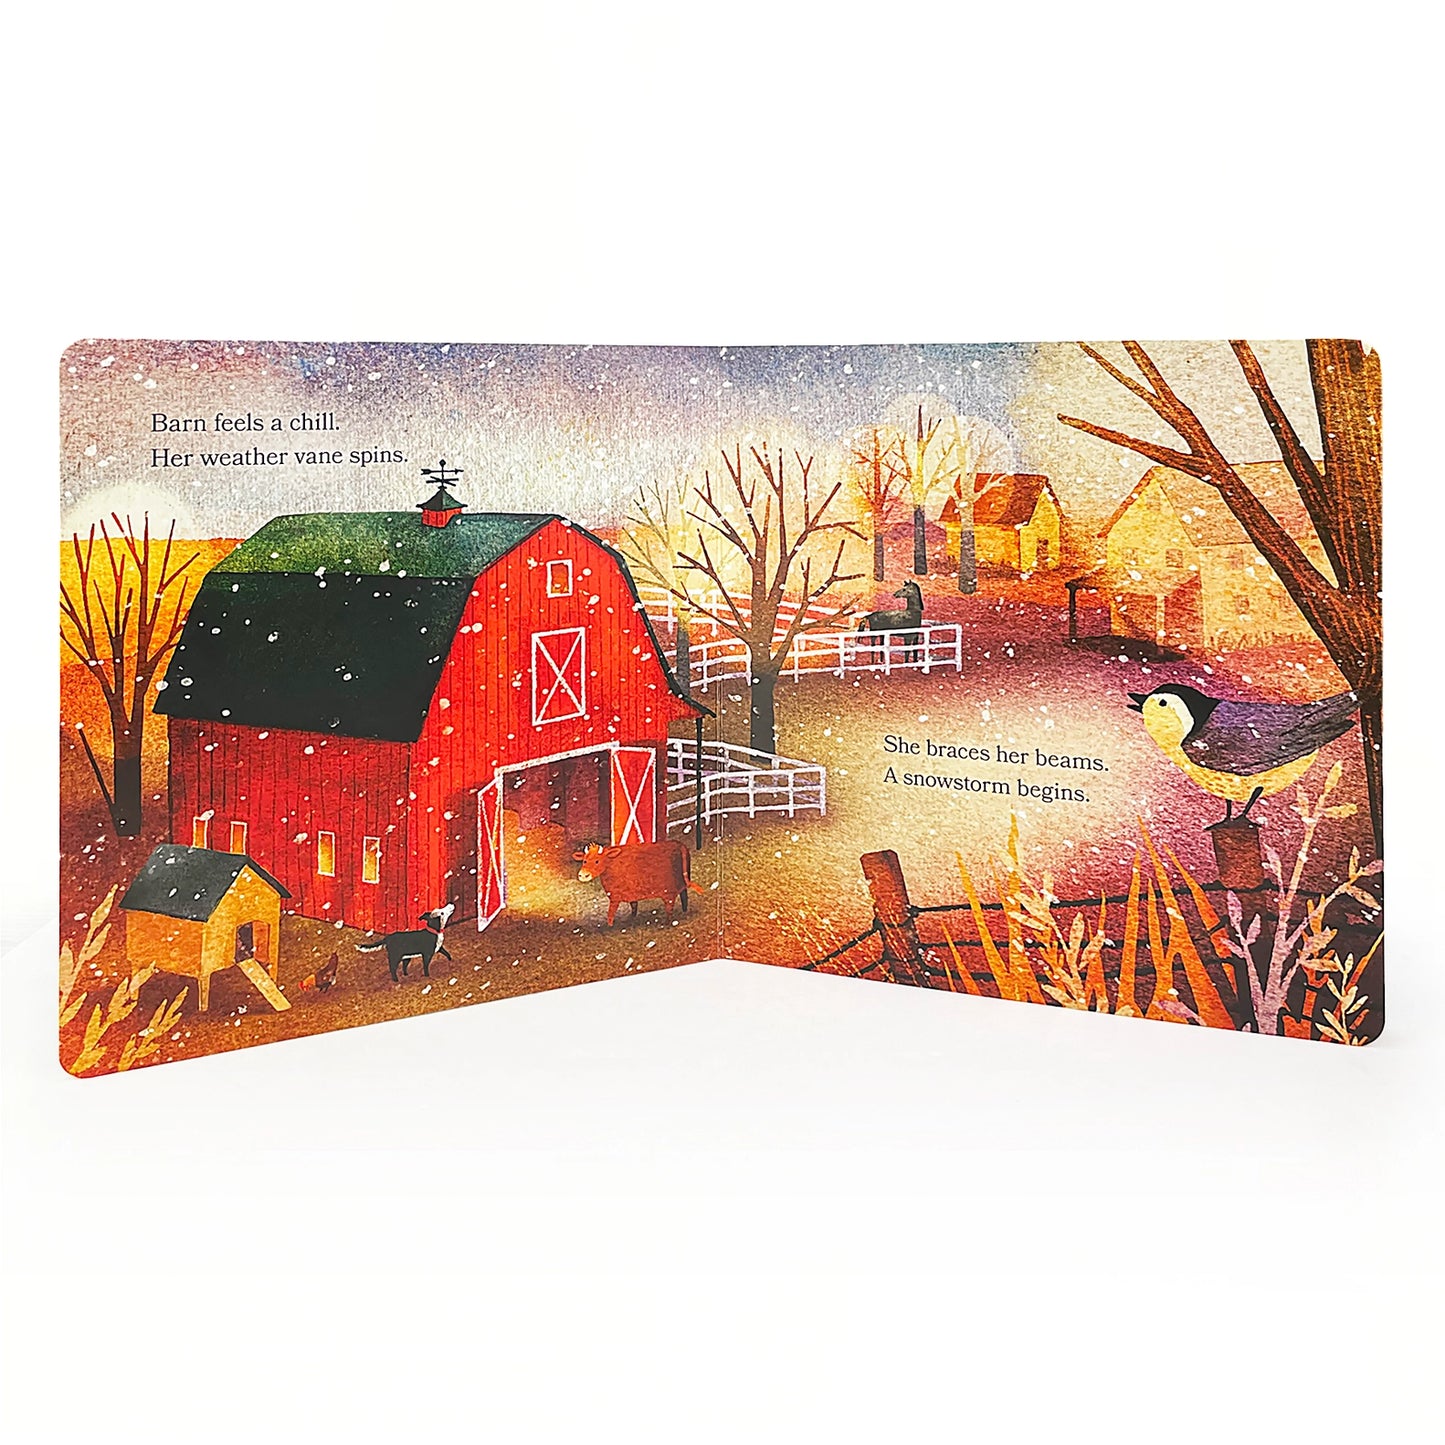 Barn in Winter: Safe and Warm on the Farm Board Book